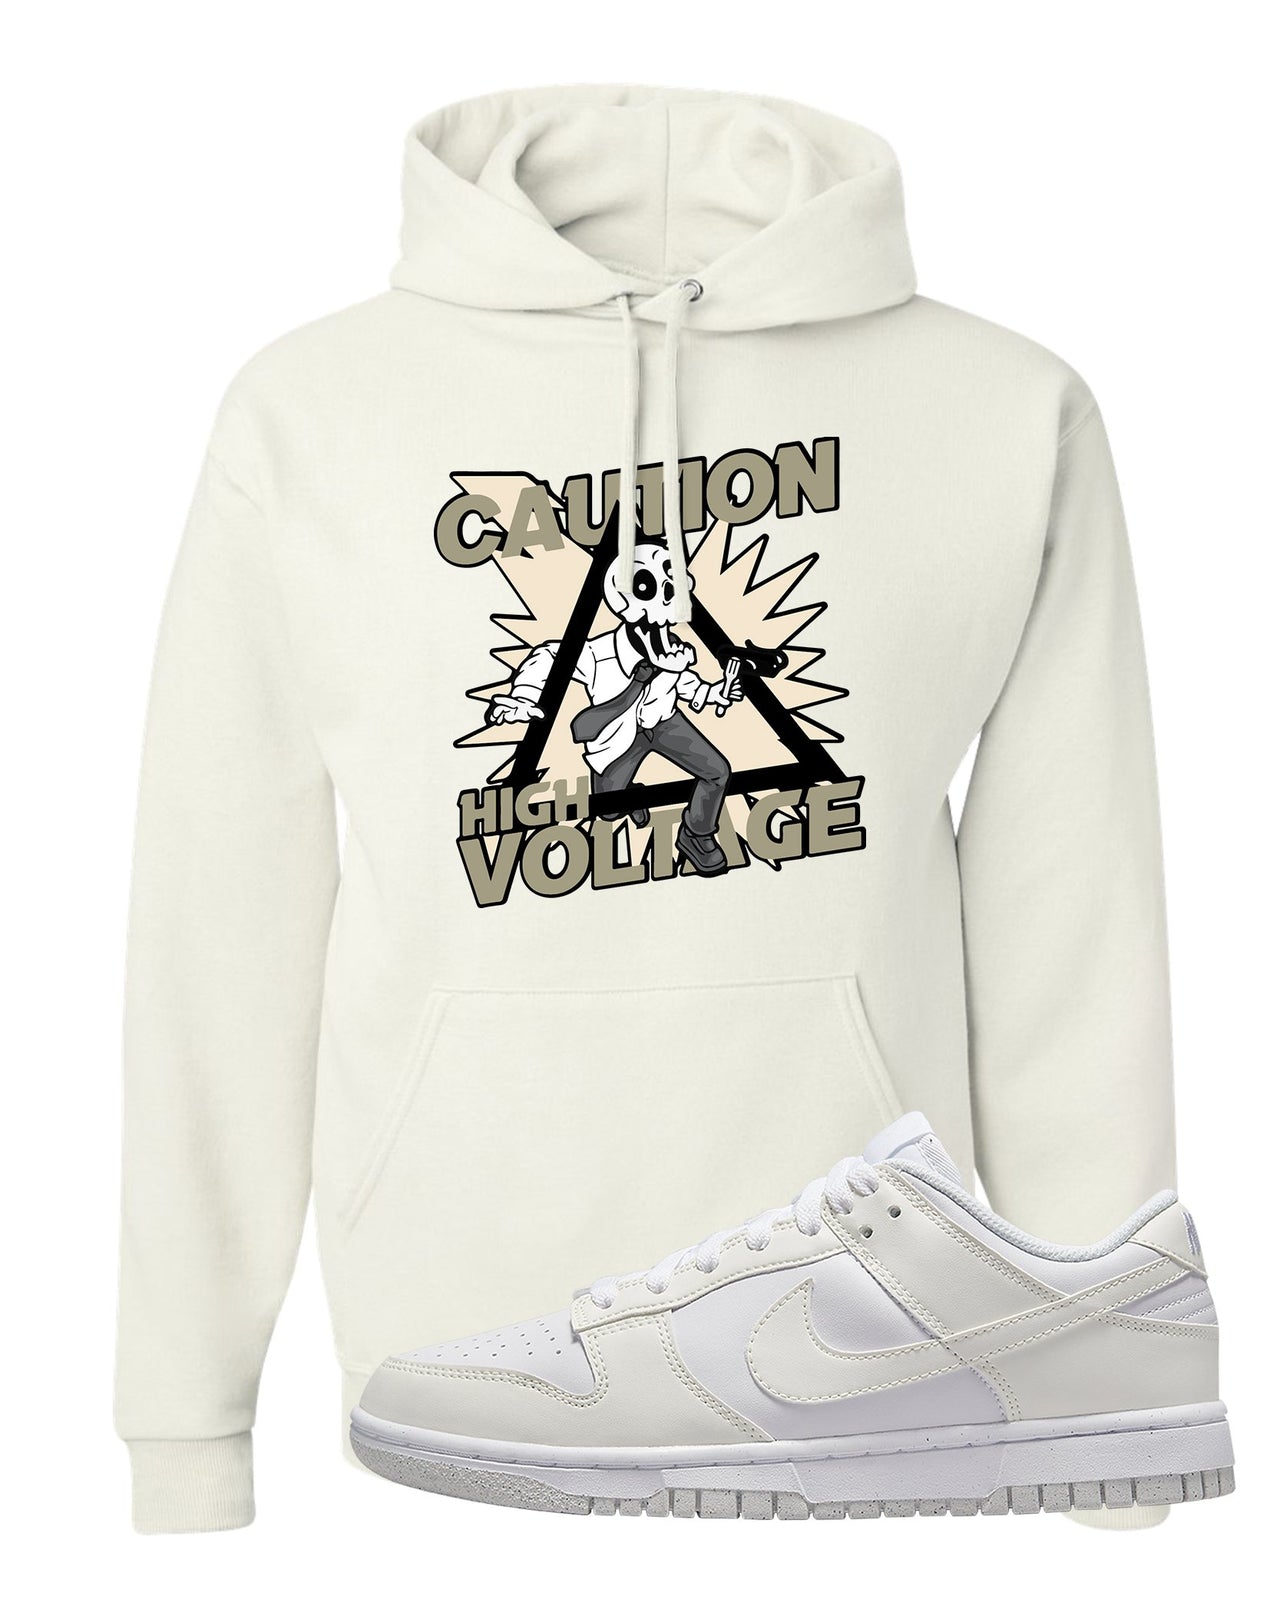 Next Nature White Low Dunks Hoodie | Caution High Voltage, White